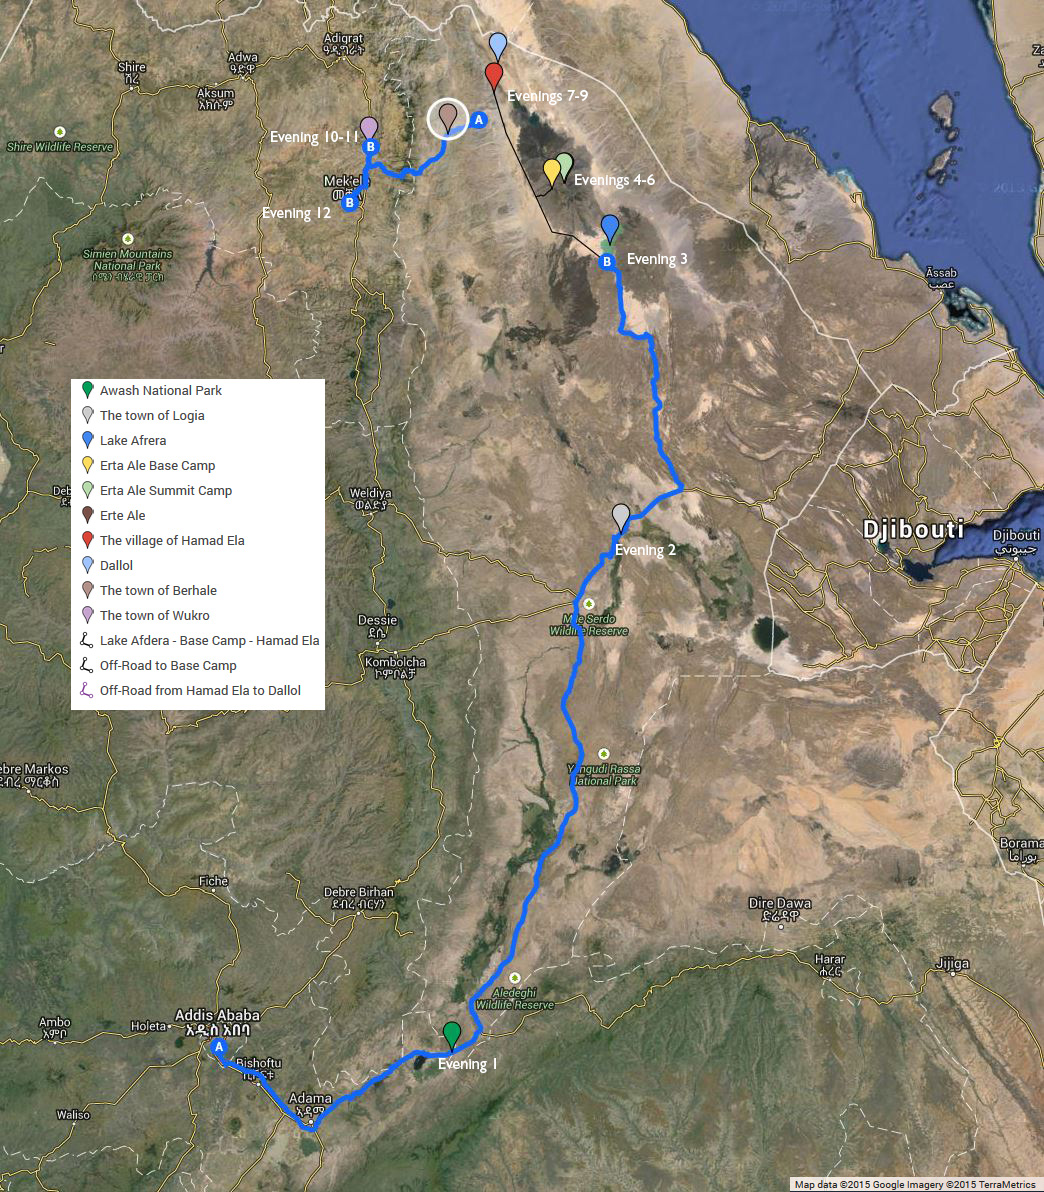 An overview of the route taken on the 13 trip.